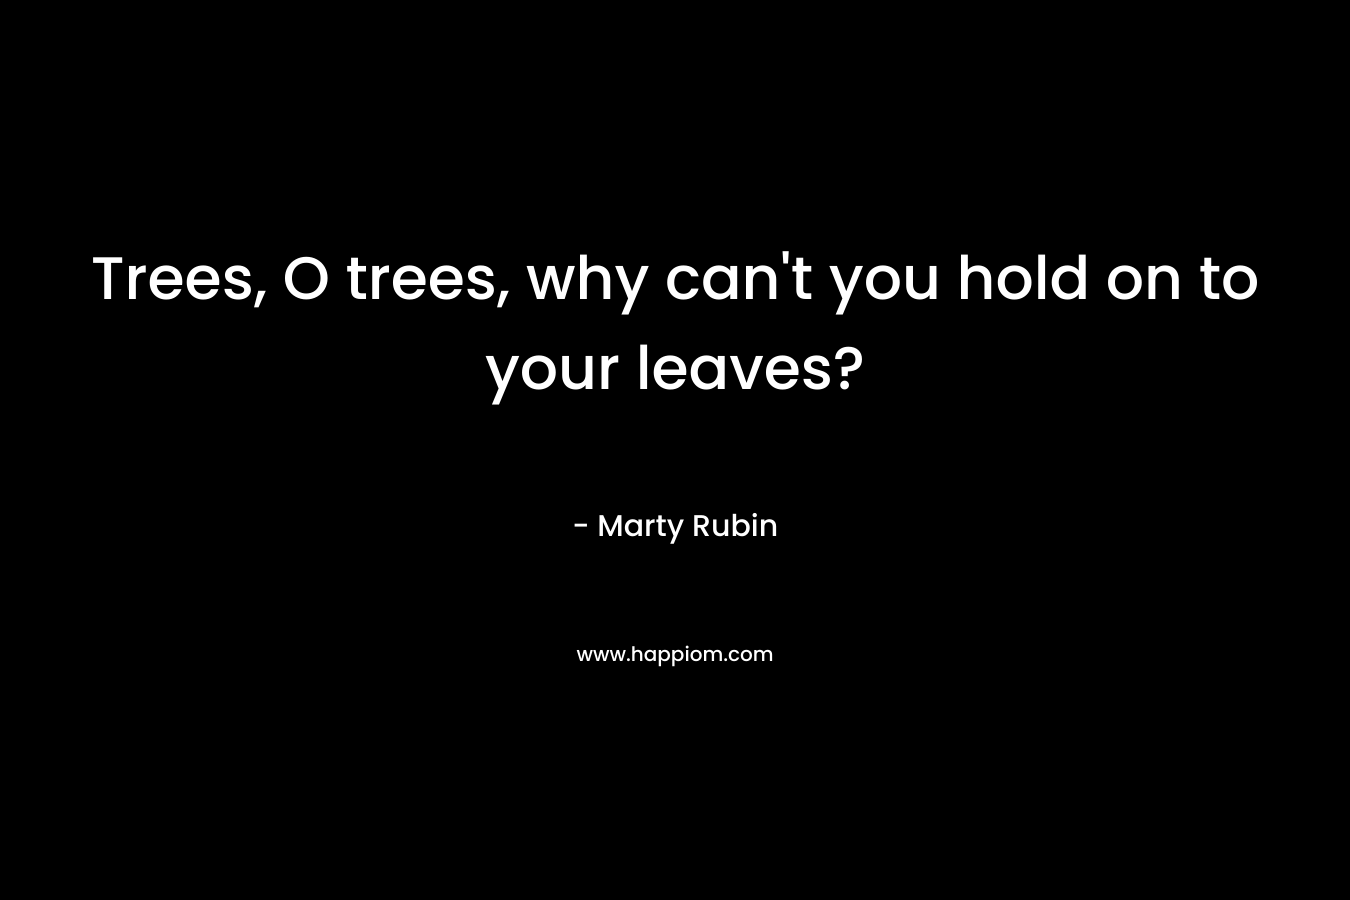 Trees, O trees, why can't you hold on to your leaves?